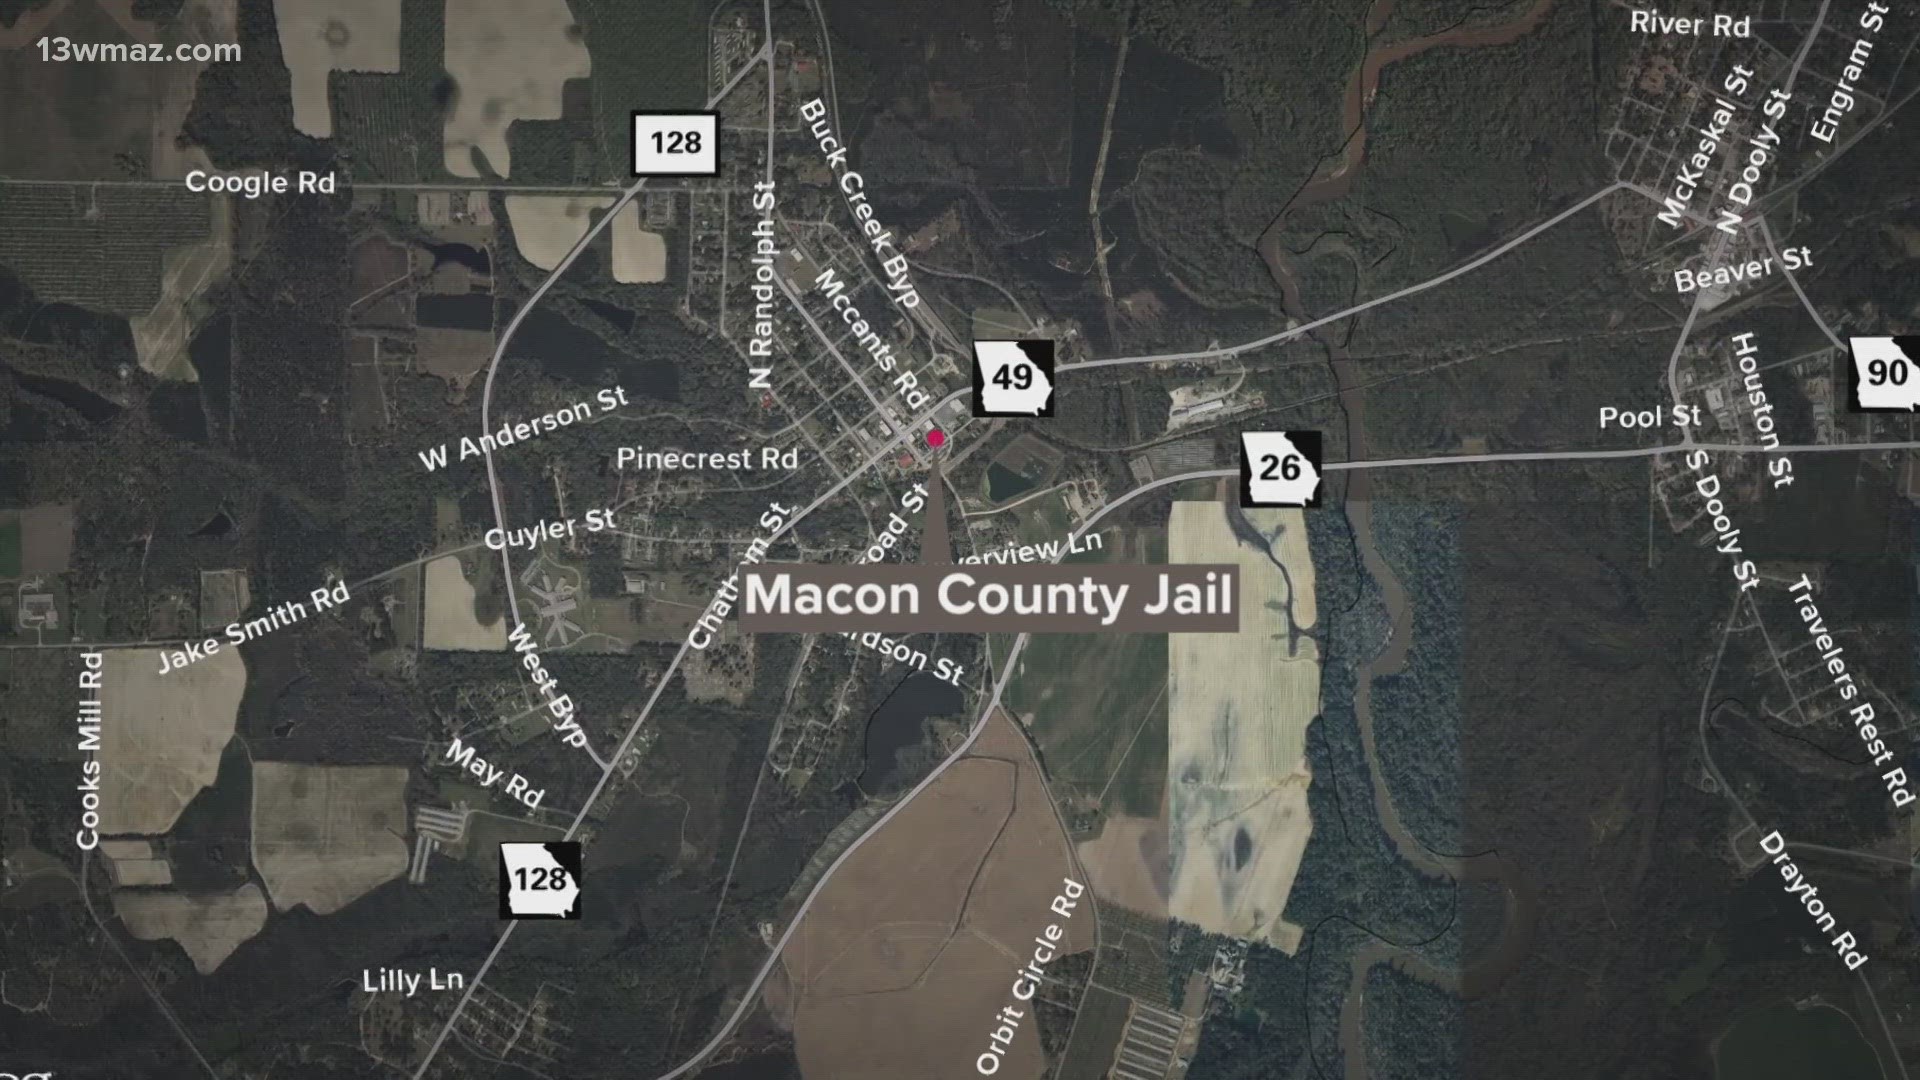 The sheriff's office realized the inmates escaped at around 5:30 p.m. Friday, but they believe the escape happened around 9:30 p.m. Thursday night.